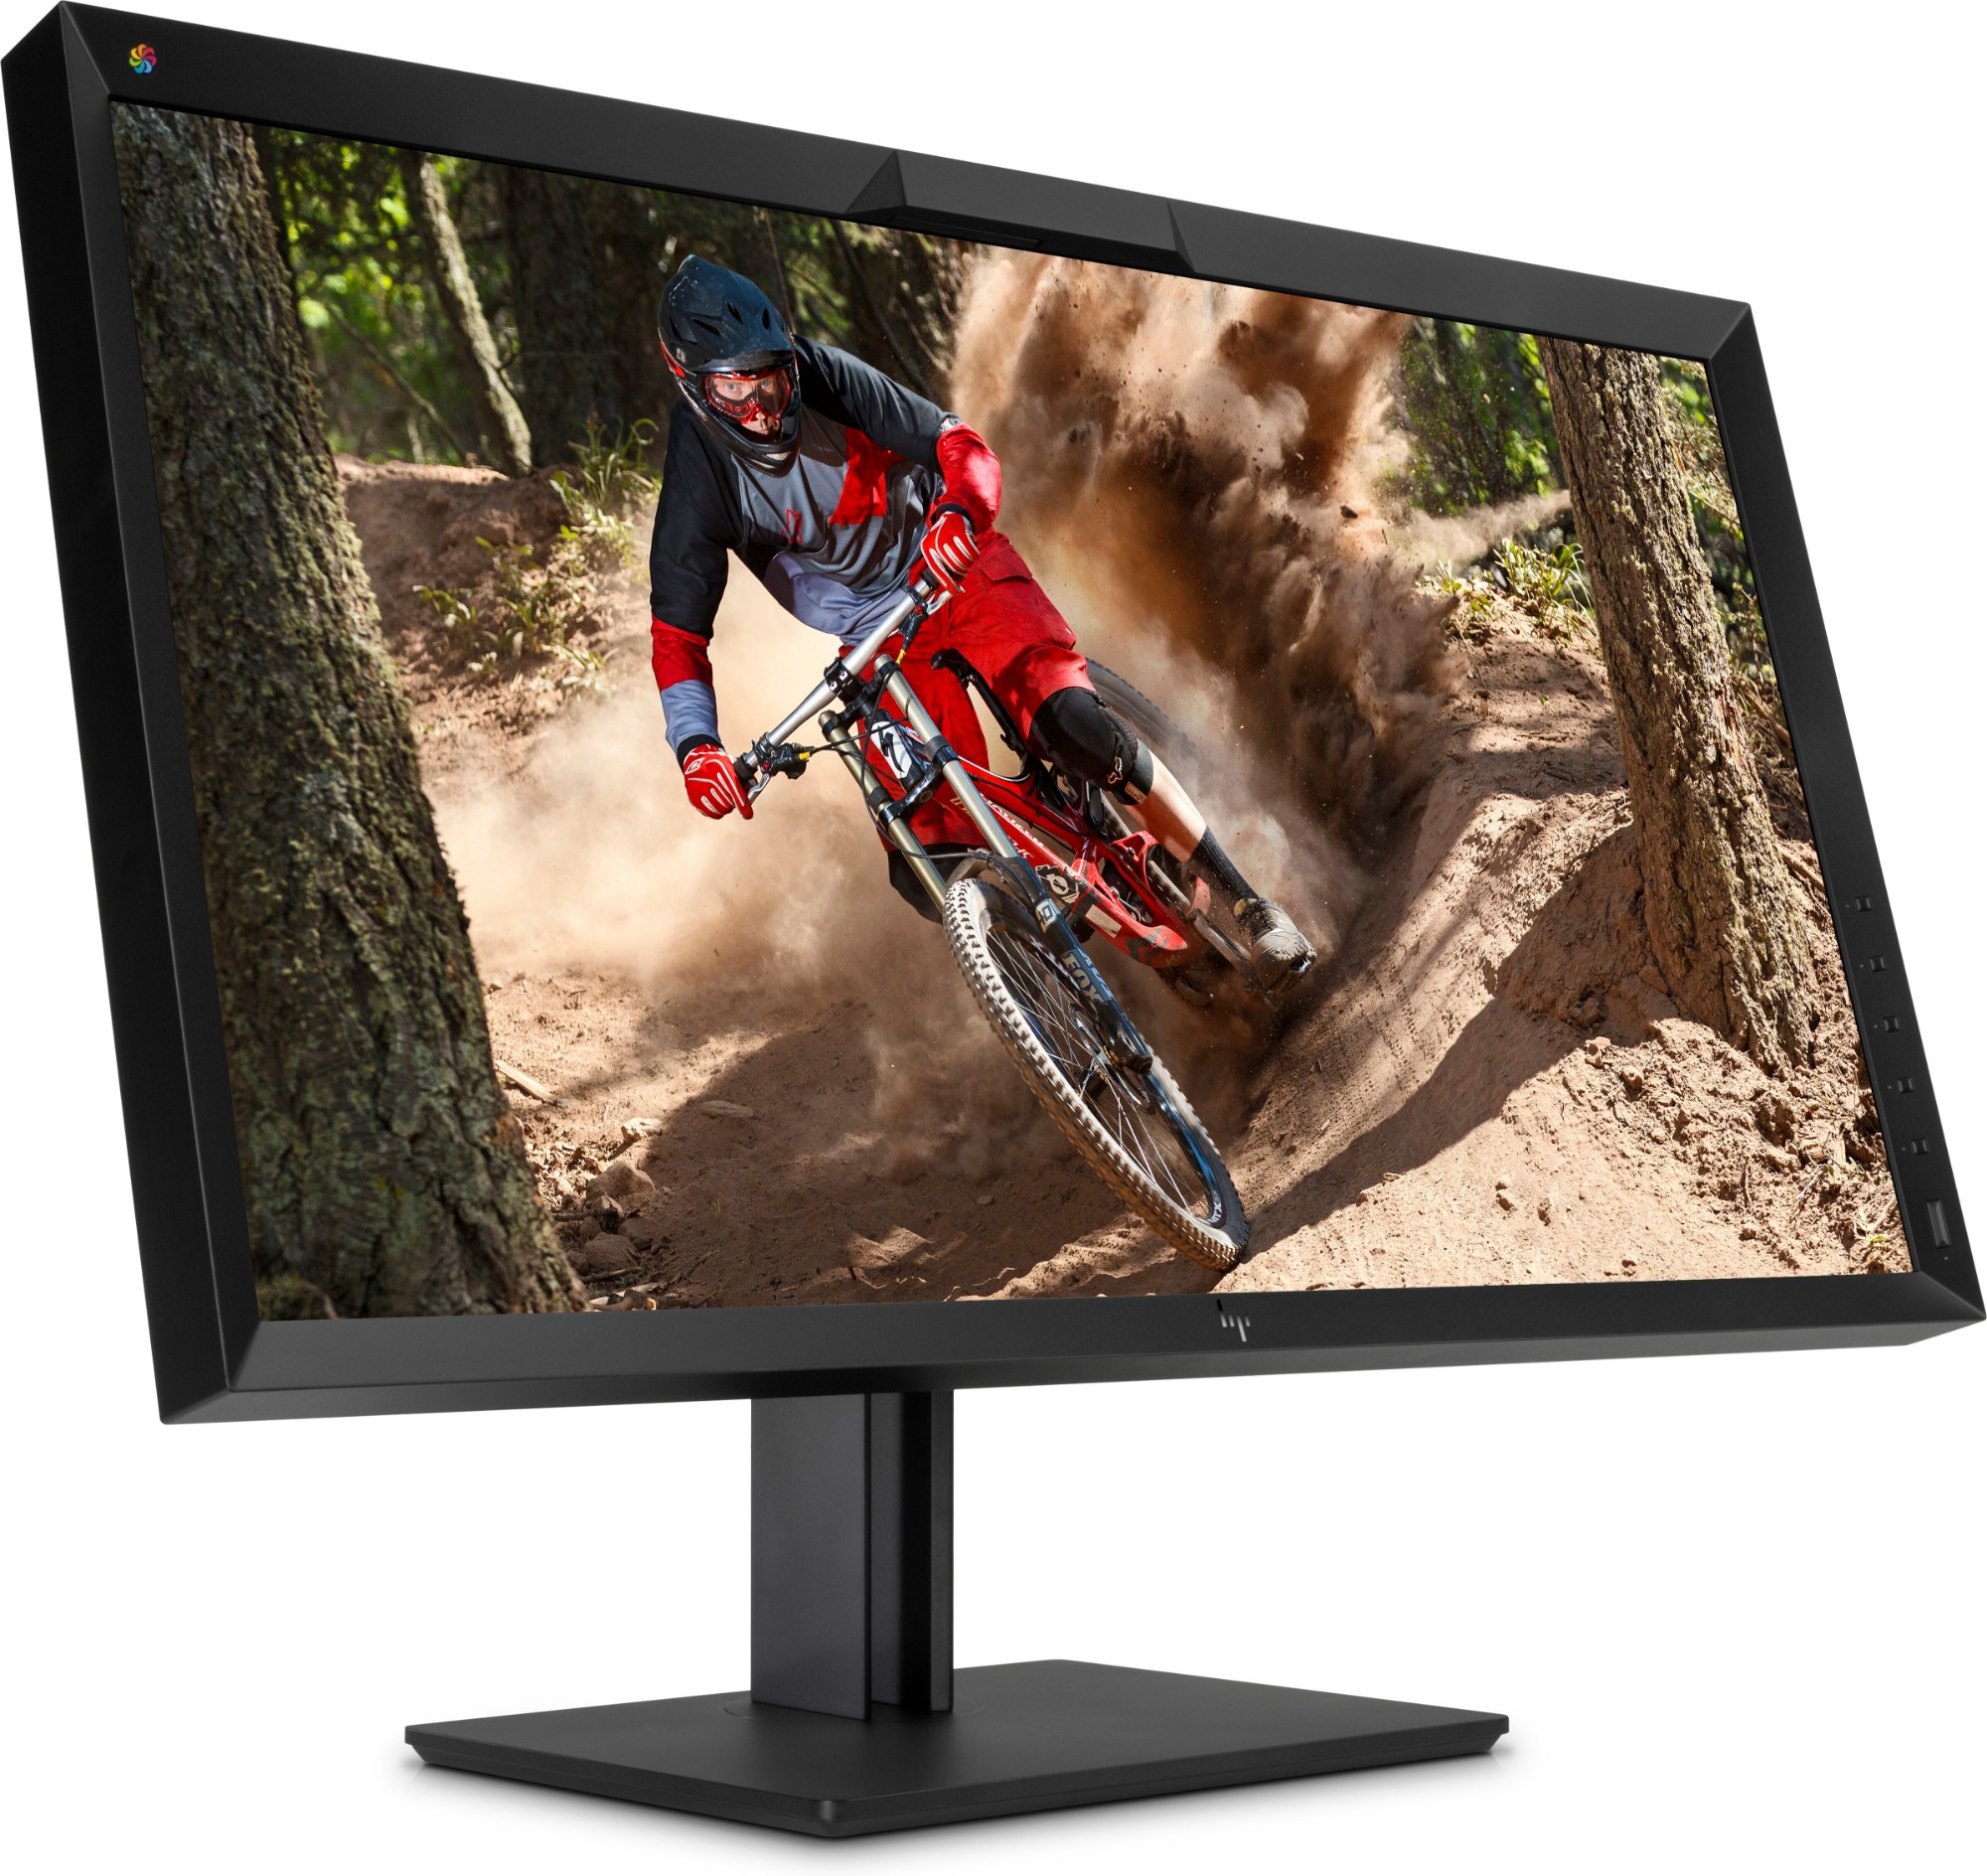 HP DreamColor Z31x computer monitor 79 cm (31.1